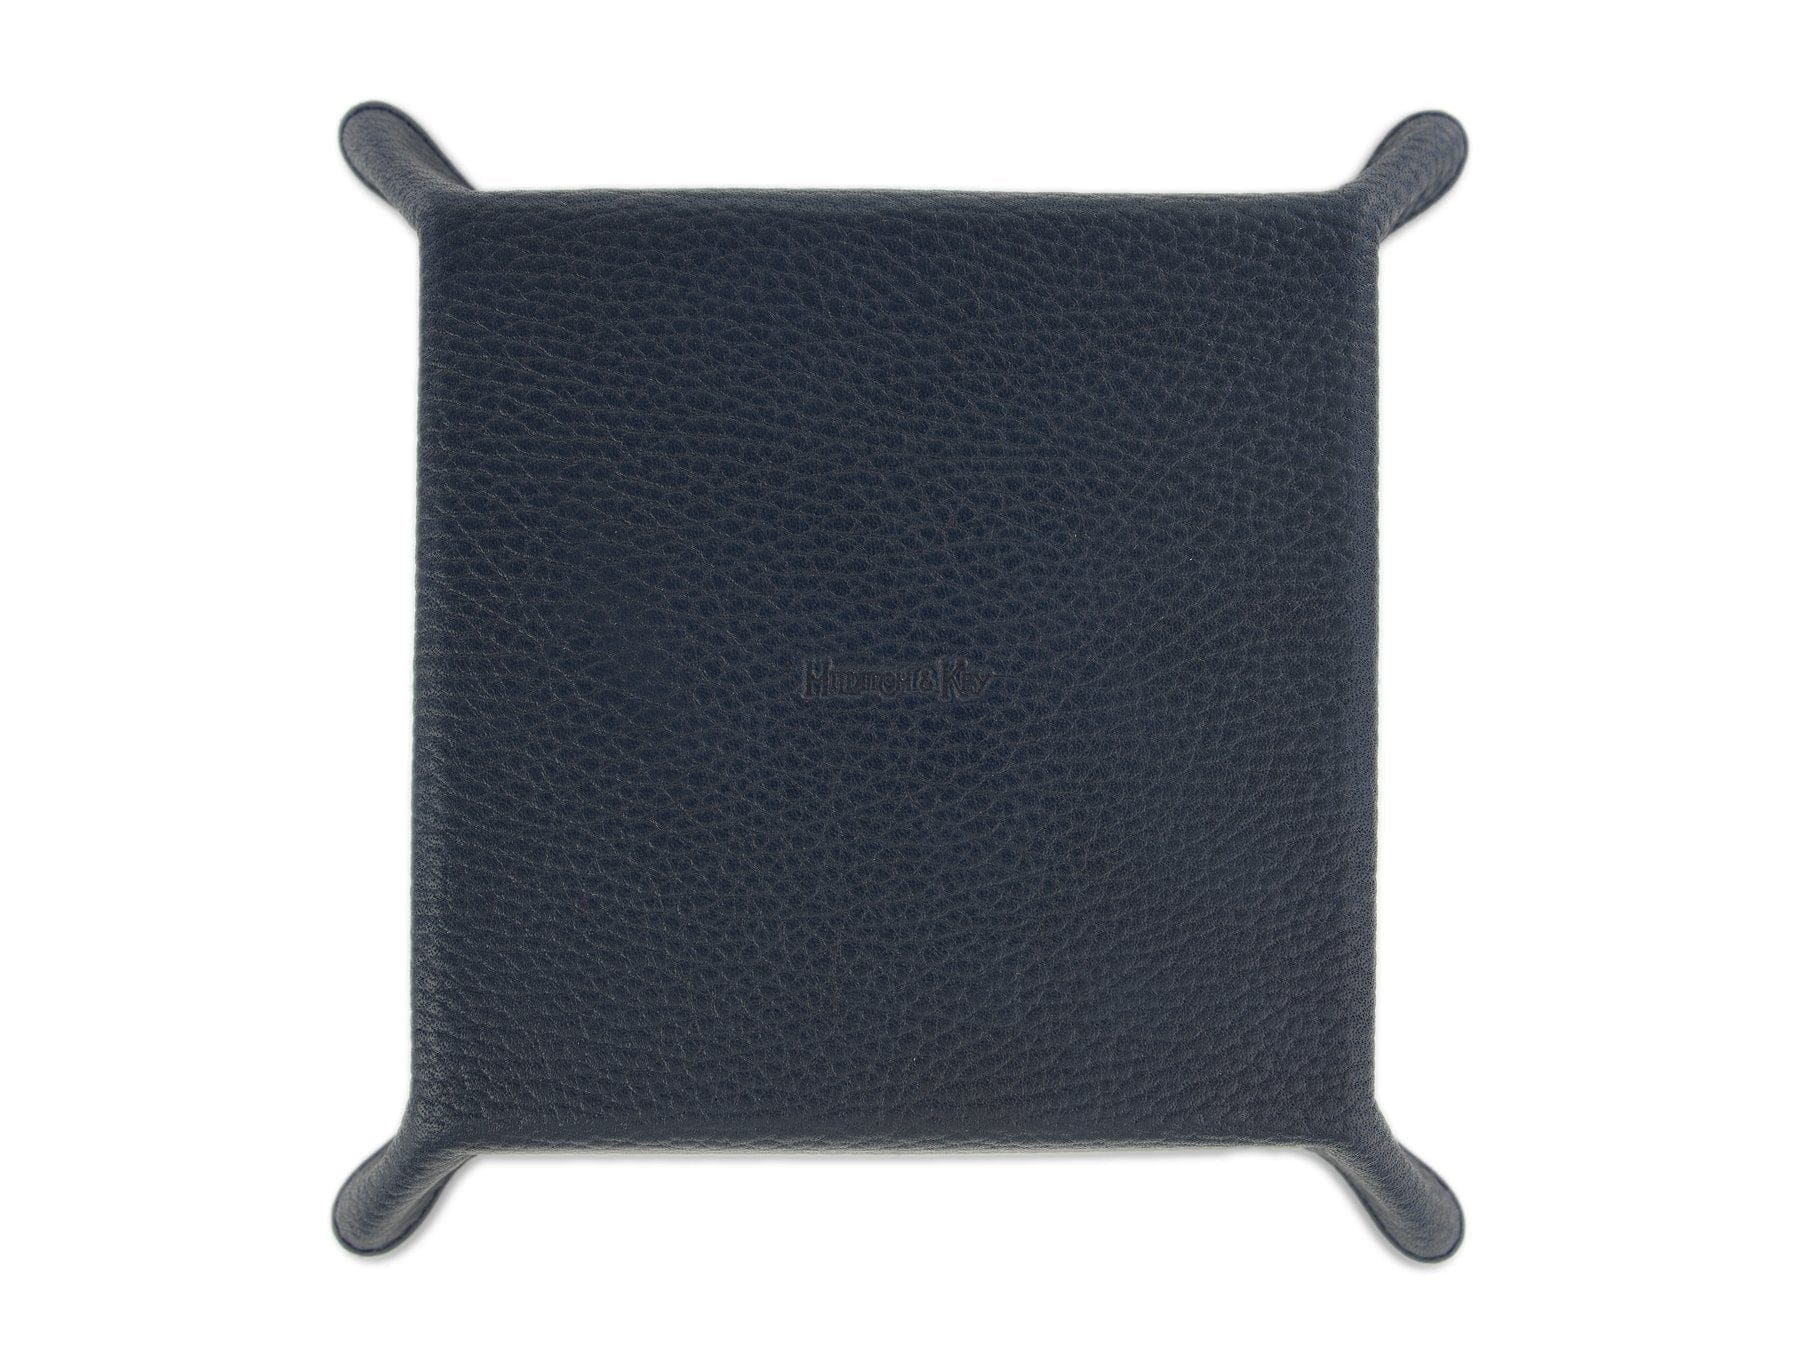 Navy Calf Leather with Purple Suede Travel Tray